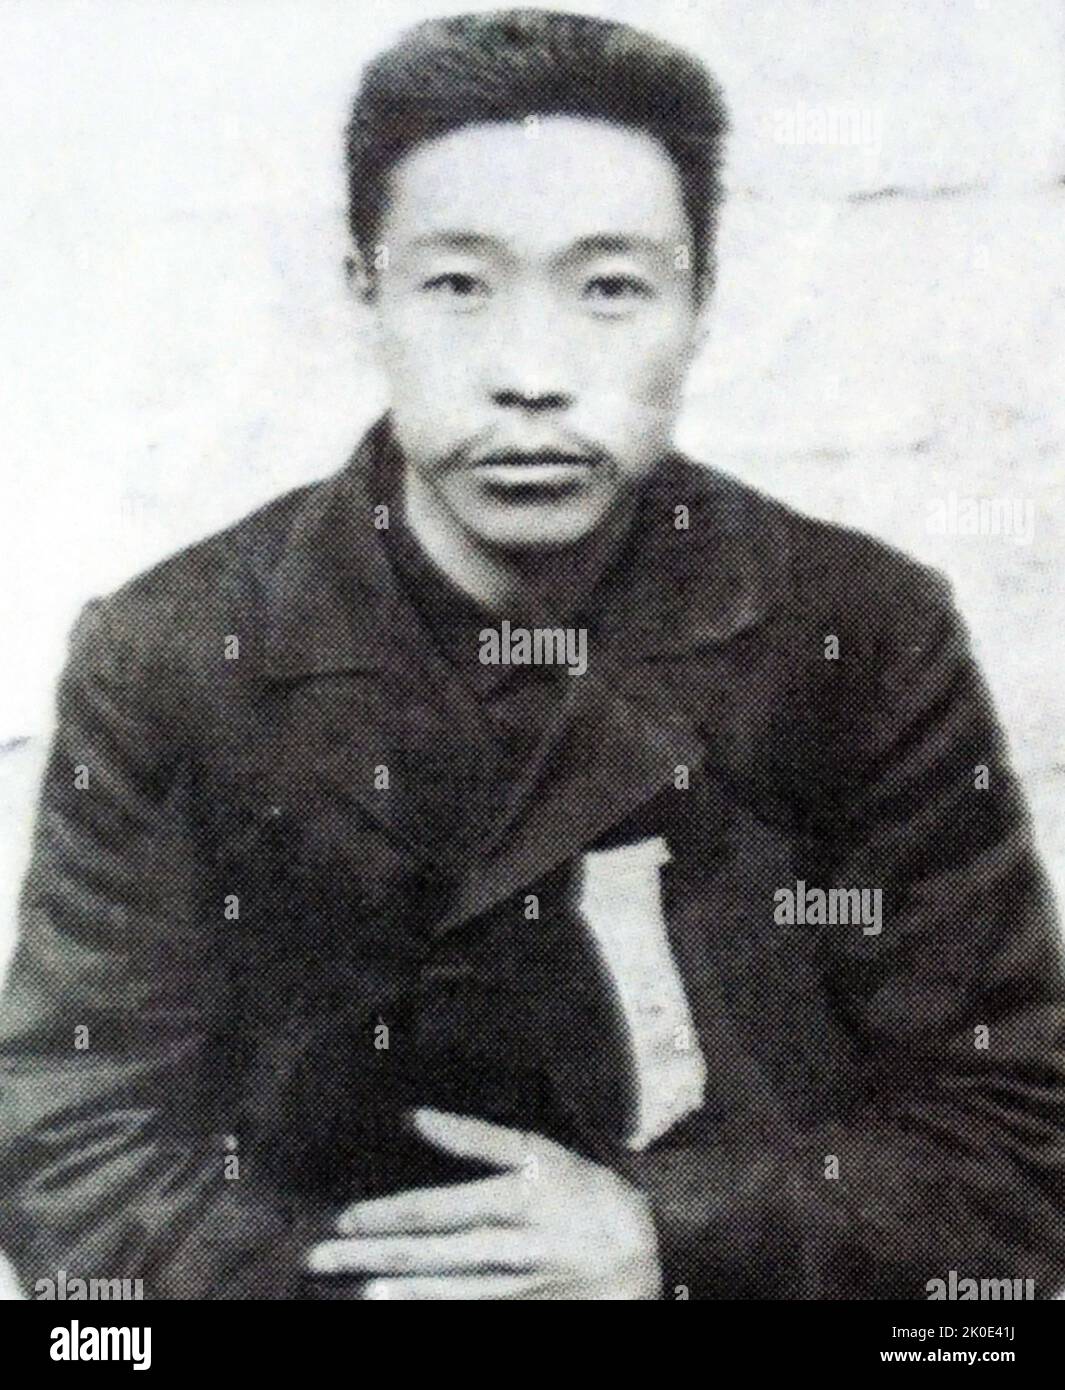 An Jung-geun (1879 - 1910) Korean-independence activist, who assassinated Prince Ito Hirobumi, President of the Privy Council of Japan, following the signing of the Eulsa Treaty on 26 October 1909, with Korea on the verge of annexation by Japan. He was imprisoned and later executed by Japanese authorities on 26 March 1910. An was posthumously awarded the Order of Merit for National Foundation in 1962 by the South Korean government Stock Photo